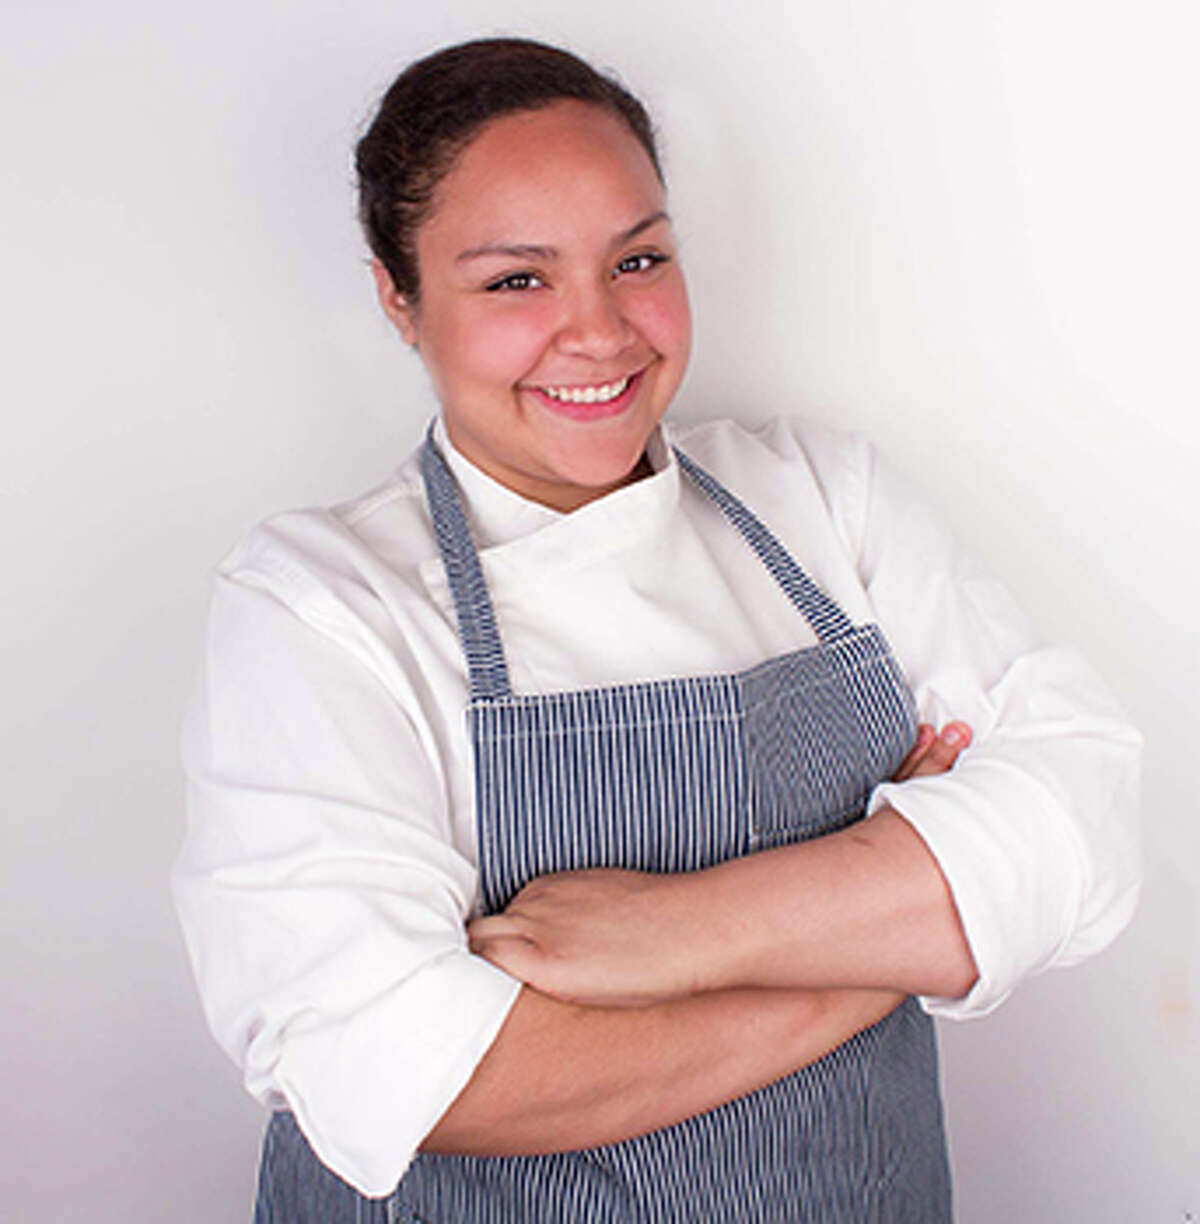 Cypress Ridge High School graduate Evelyn Garcia recently won an episode of the hit Food Network show, Chopped, that aired in February. (KitchenSurfing.com)